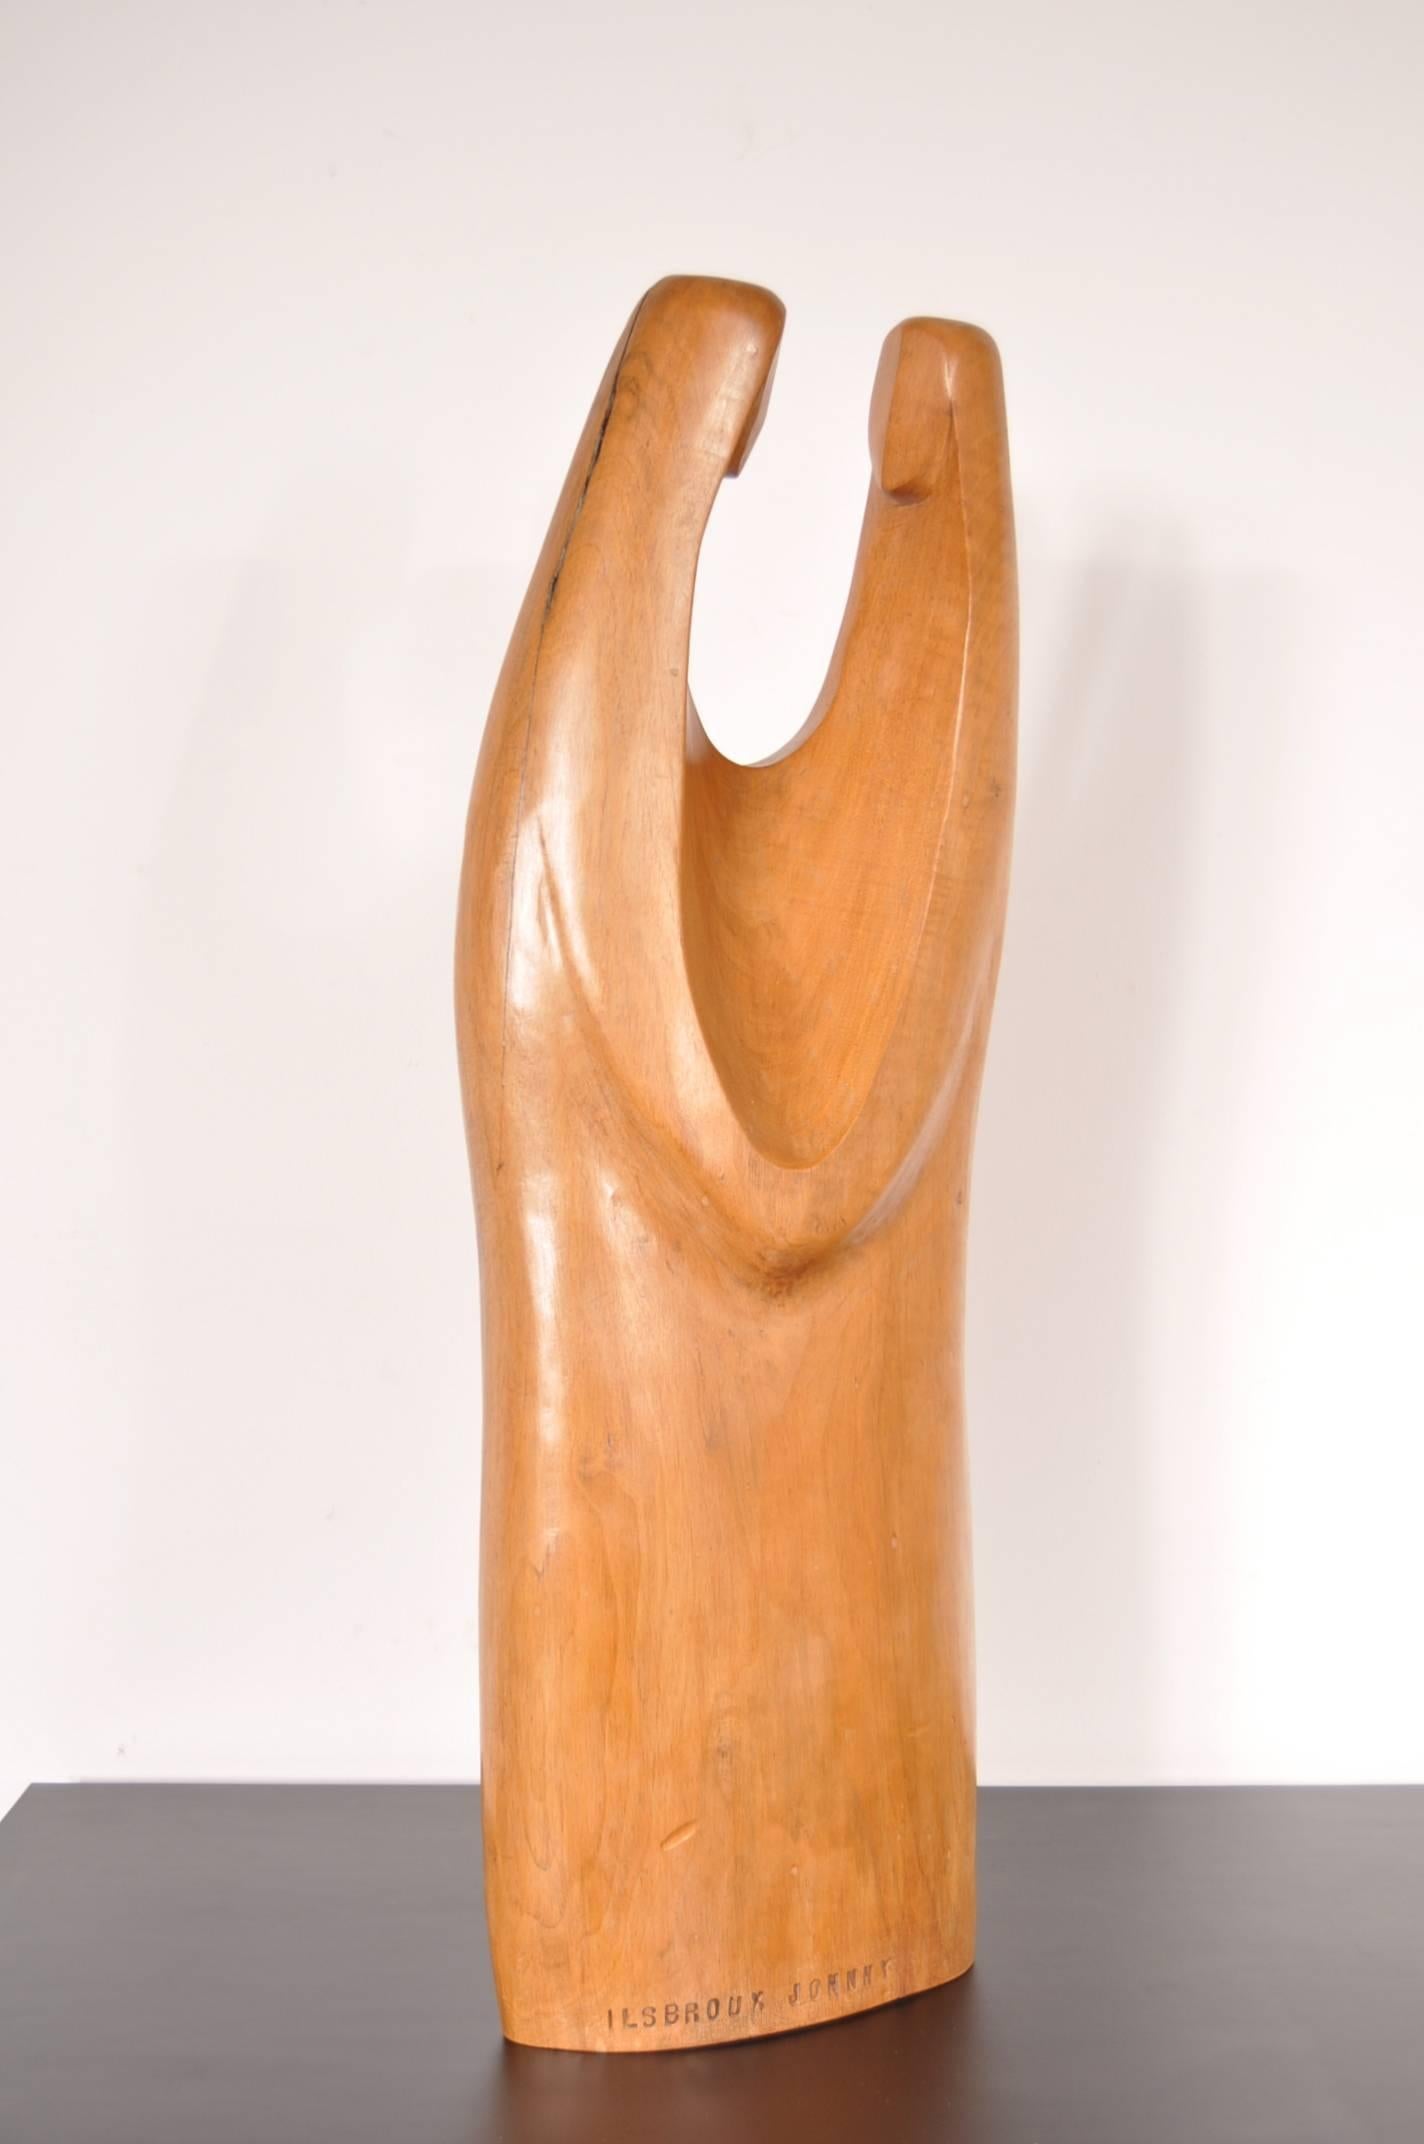 Beautiful wooden sculpture by Johnny Ilsbroux, made in Belgium, 1974.

It is an amazingly crafted sculpture and very well finished. Entirely made of the same piece of wood. Very well sculpted into a beautiful, organic shape. This rare Belgium piece